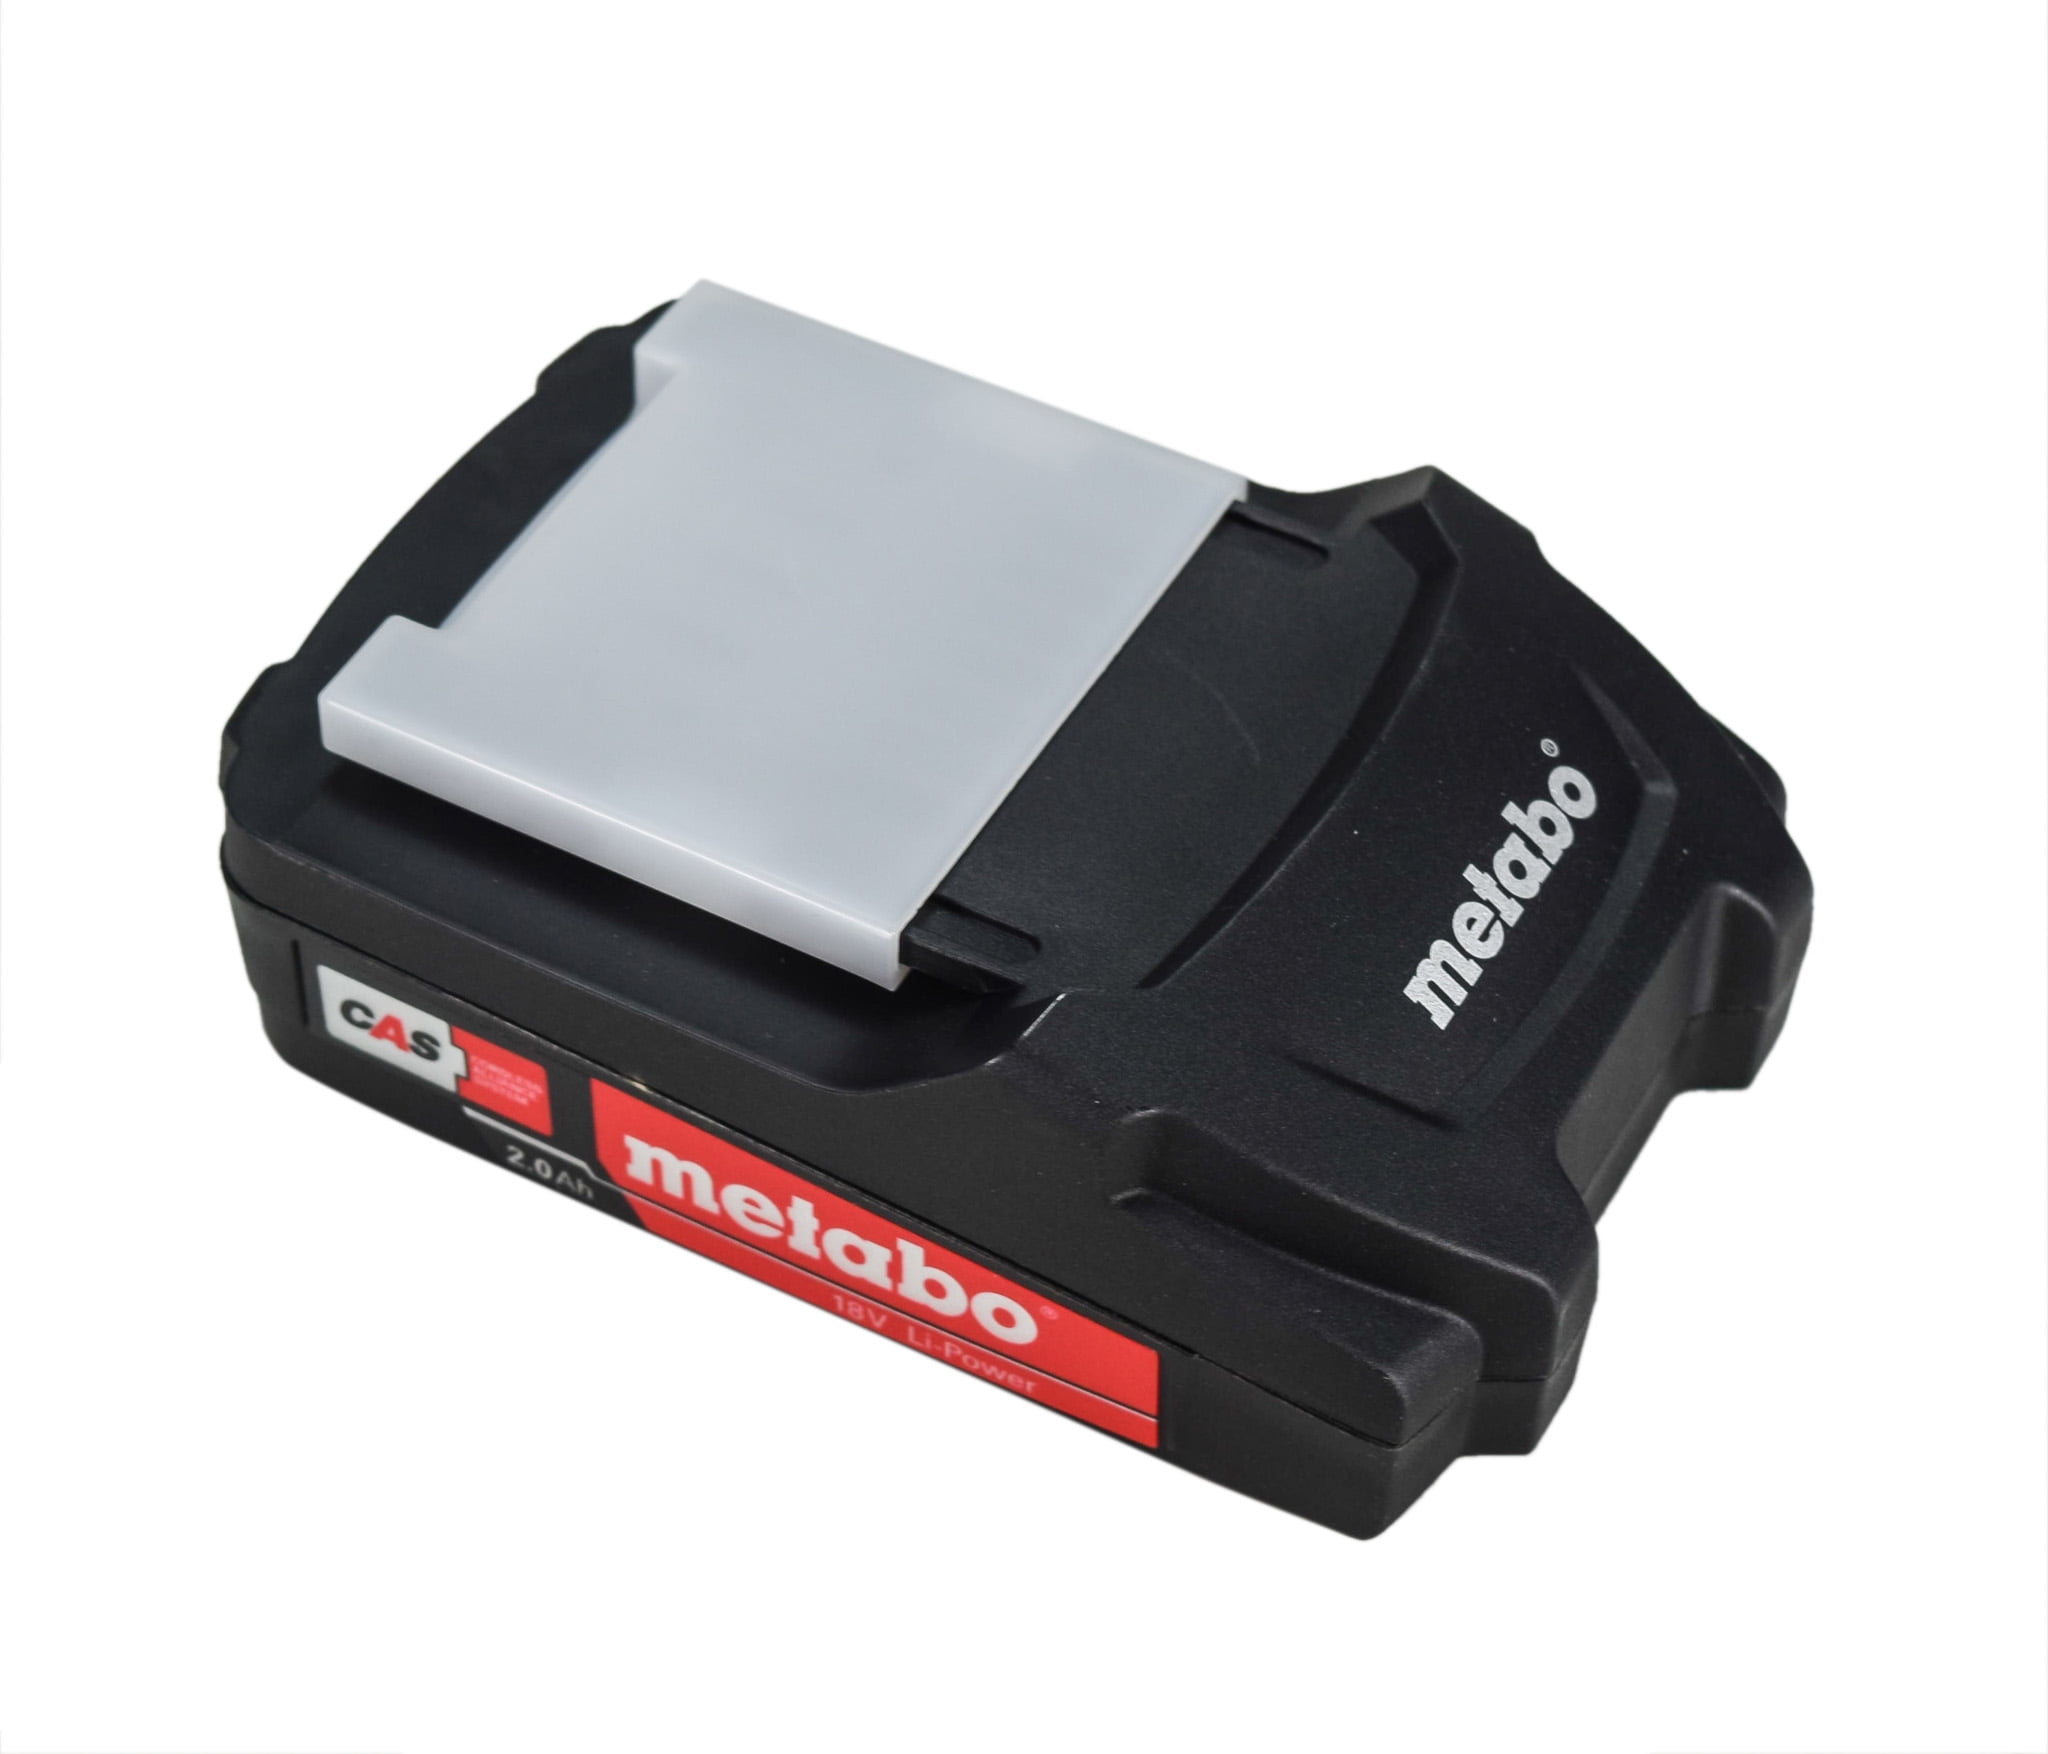 Metabo 625596000 18-Volt 2.0 Ah Lithium-Ion Compact Battery Pack 